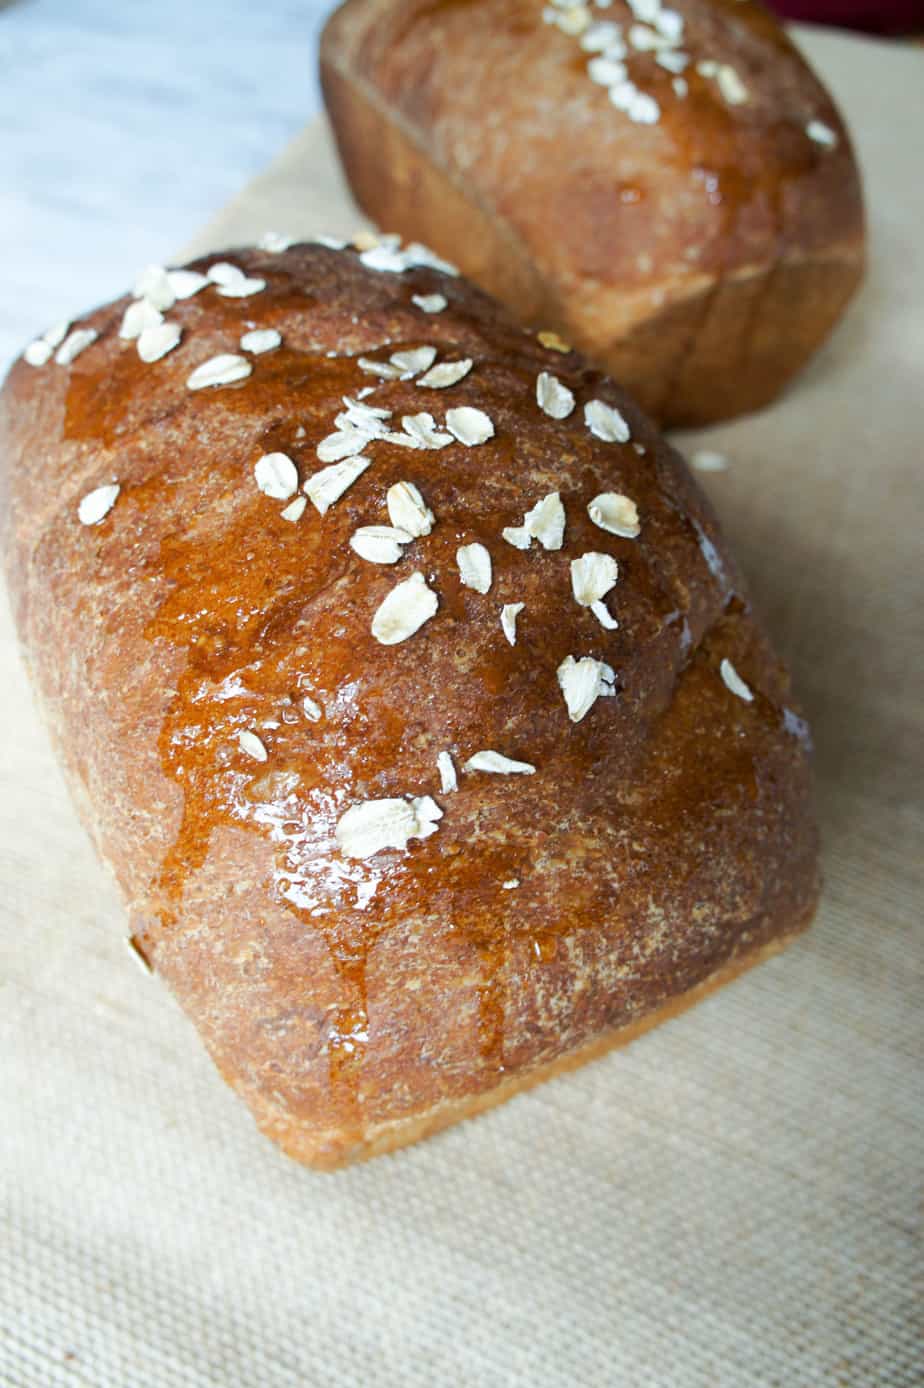 Honey Oat Wheat bread is easy to make and delicious for everything from breakfast to sandwiches!